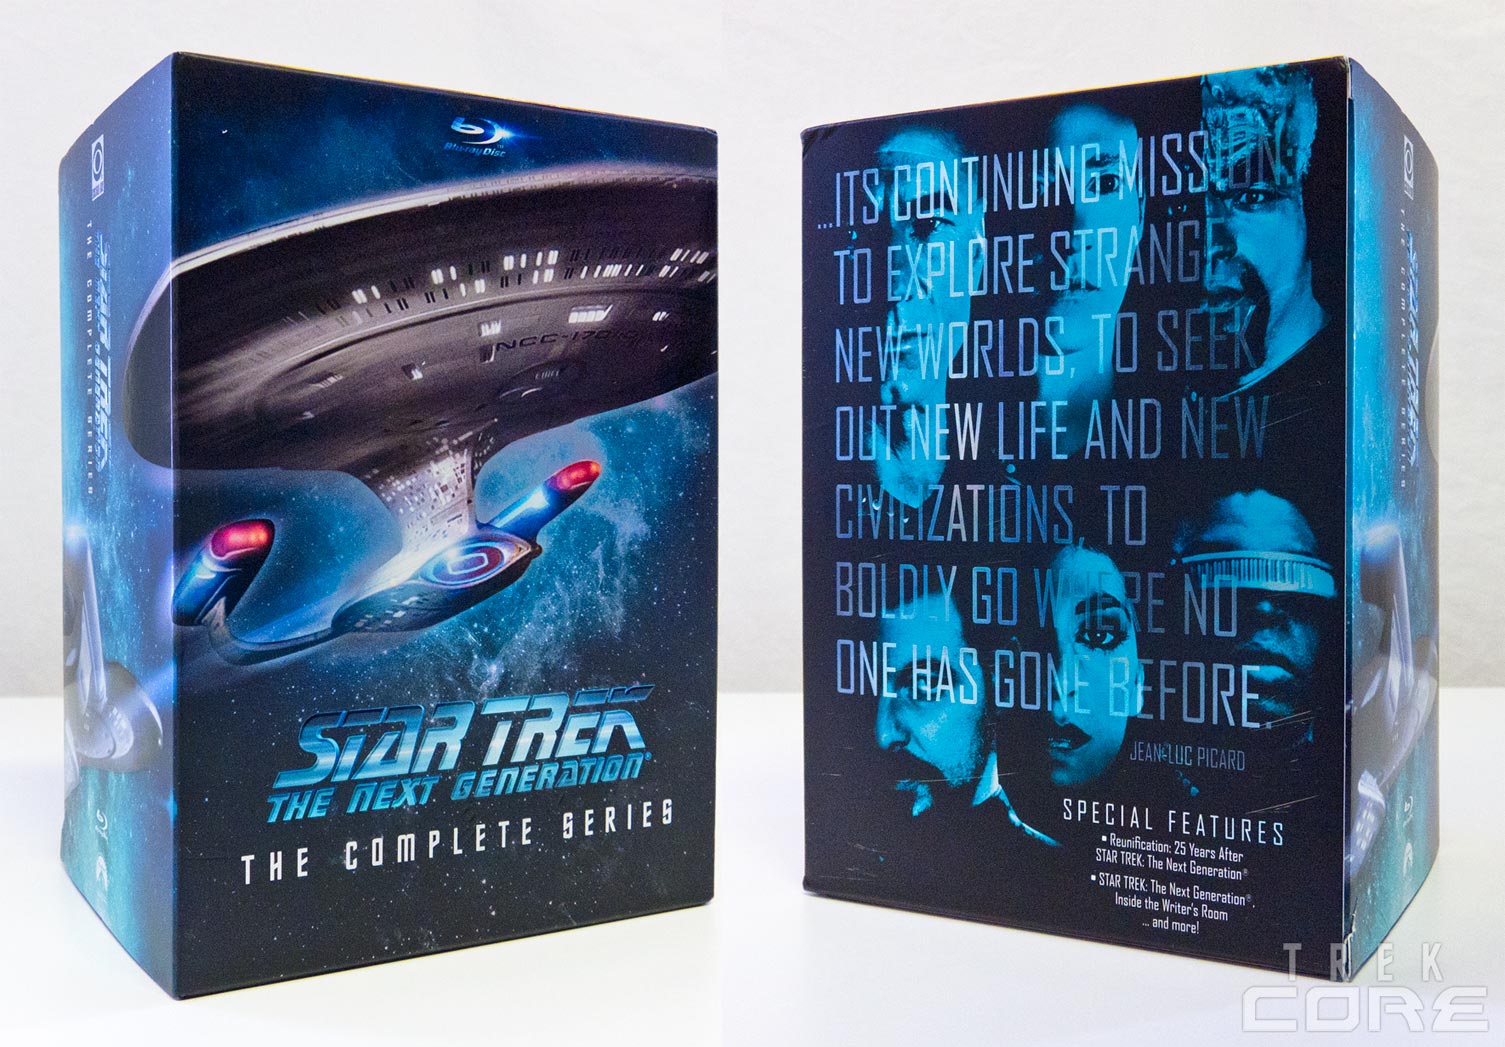 STAR TREK: THE NEXT GENERATION - THE BEST OF BOTH WORLDS Blu-ray Review